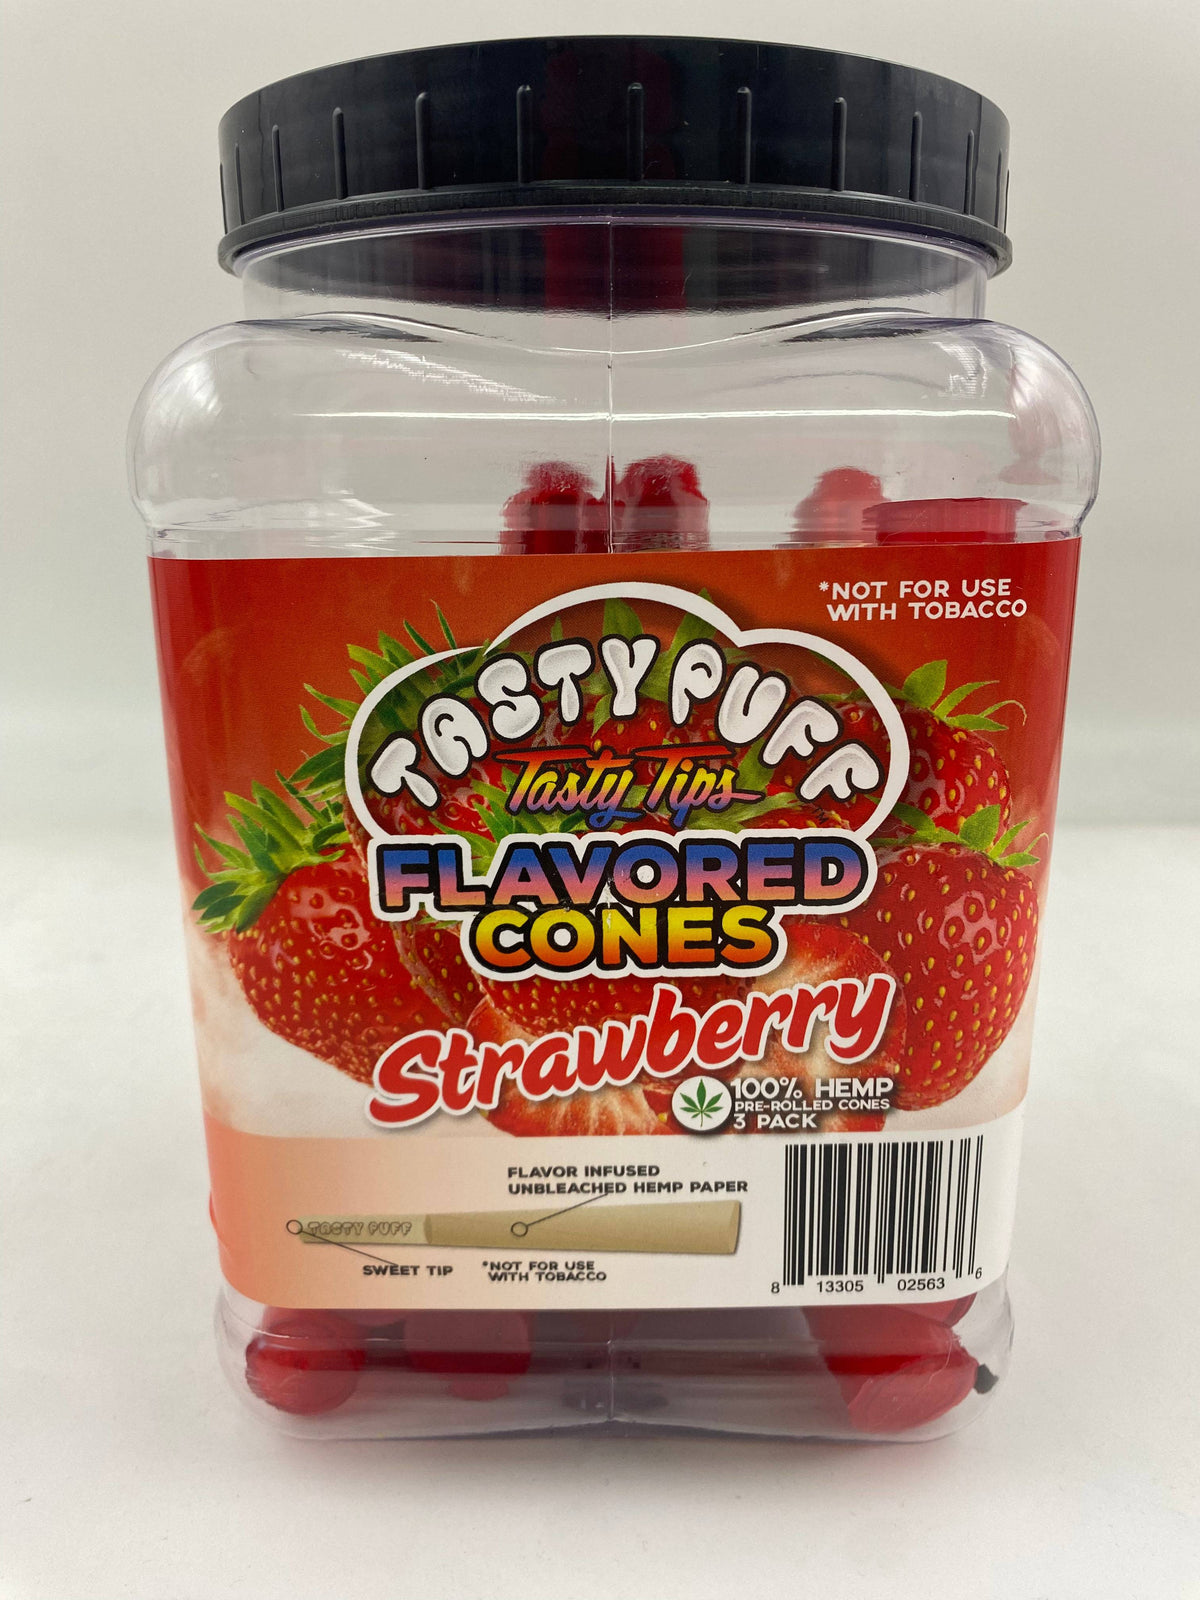 TASTY PUFF TASTY TIPS STRAWBERRY 1 1/4 FLAVORED CONES 30 CT JAR 3 CONES PER PACK